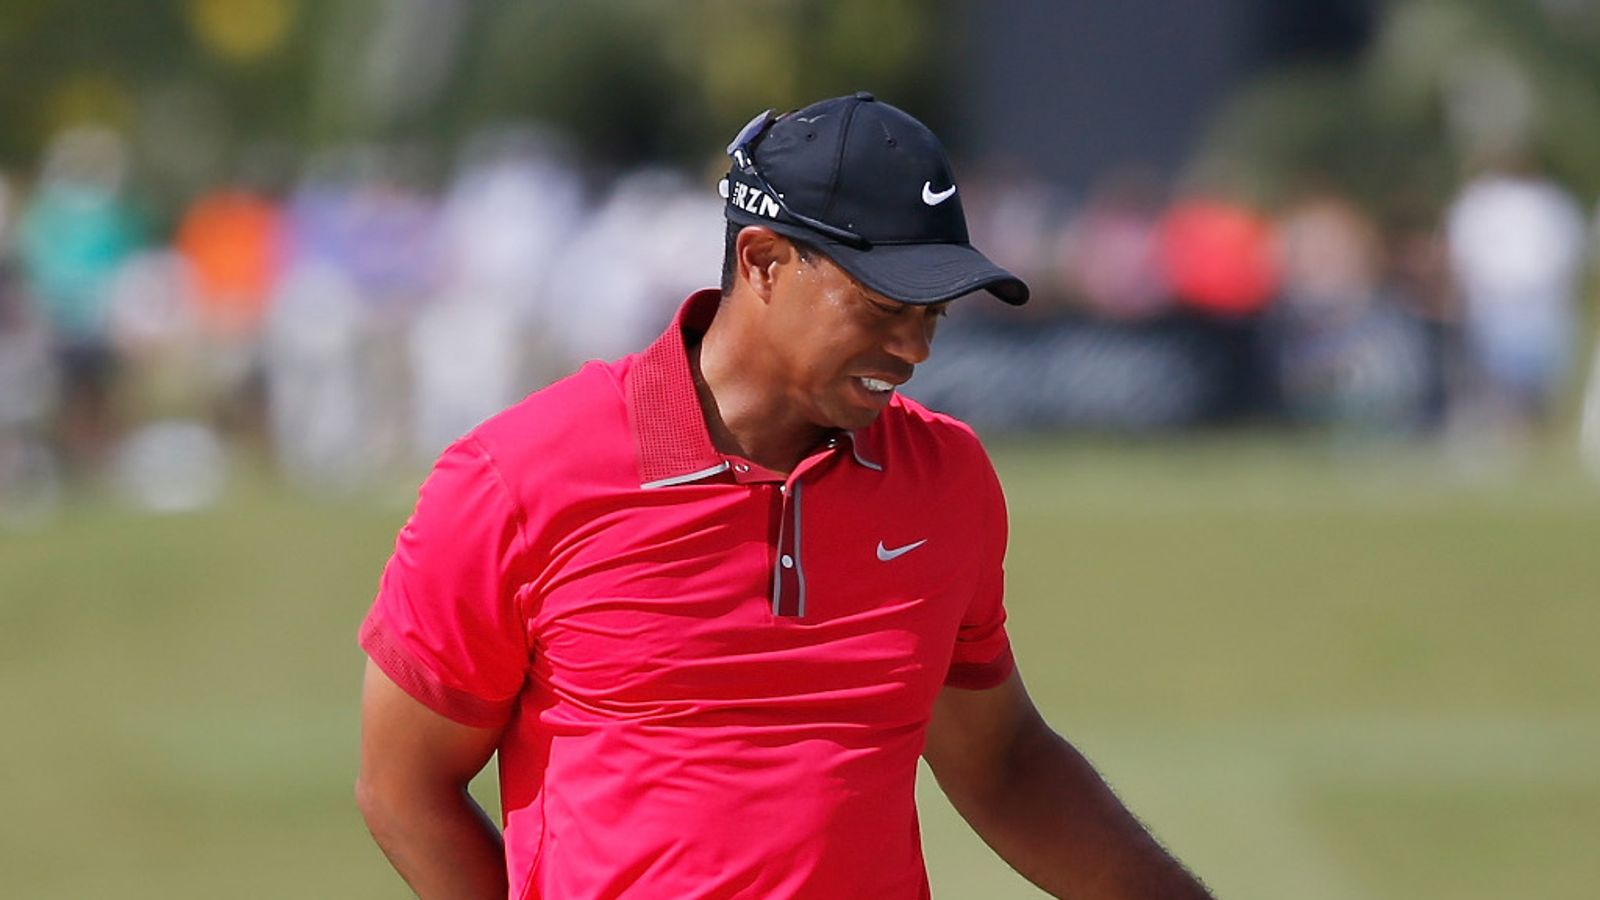 Tigers Woods to miss Masters at Augusta following back surgery | Golf ...